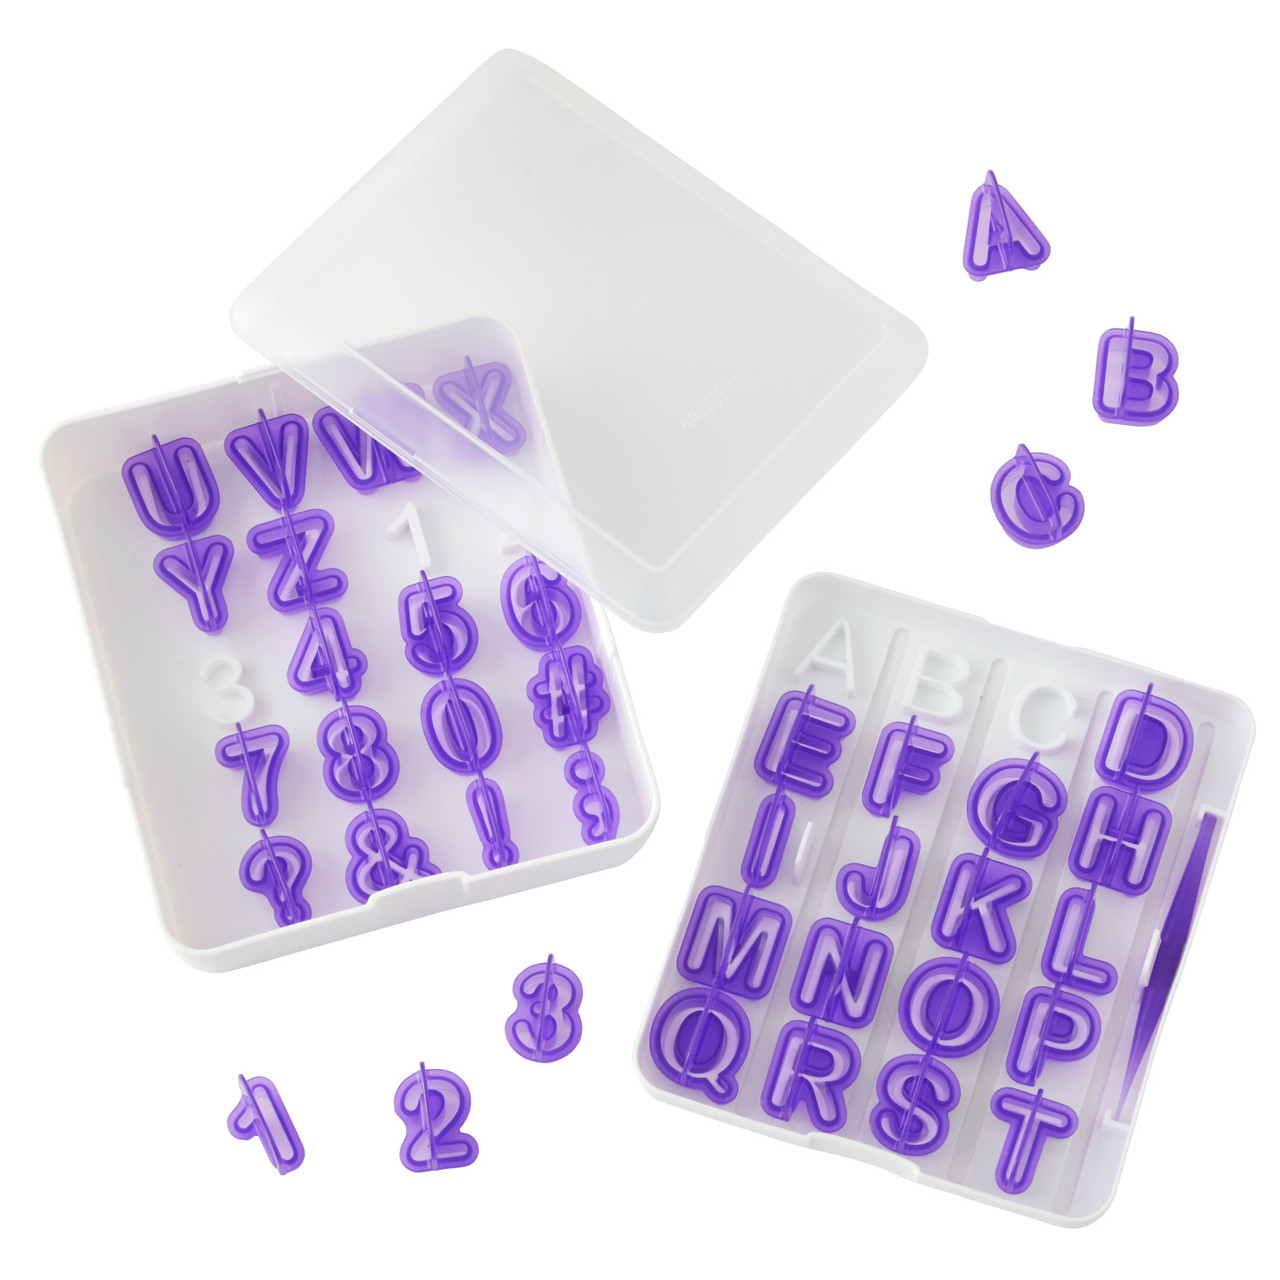  Wilton Letters & Numbers Edible Icing Decorations